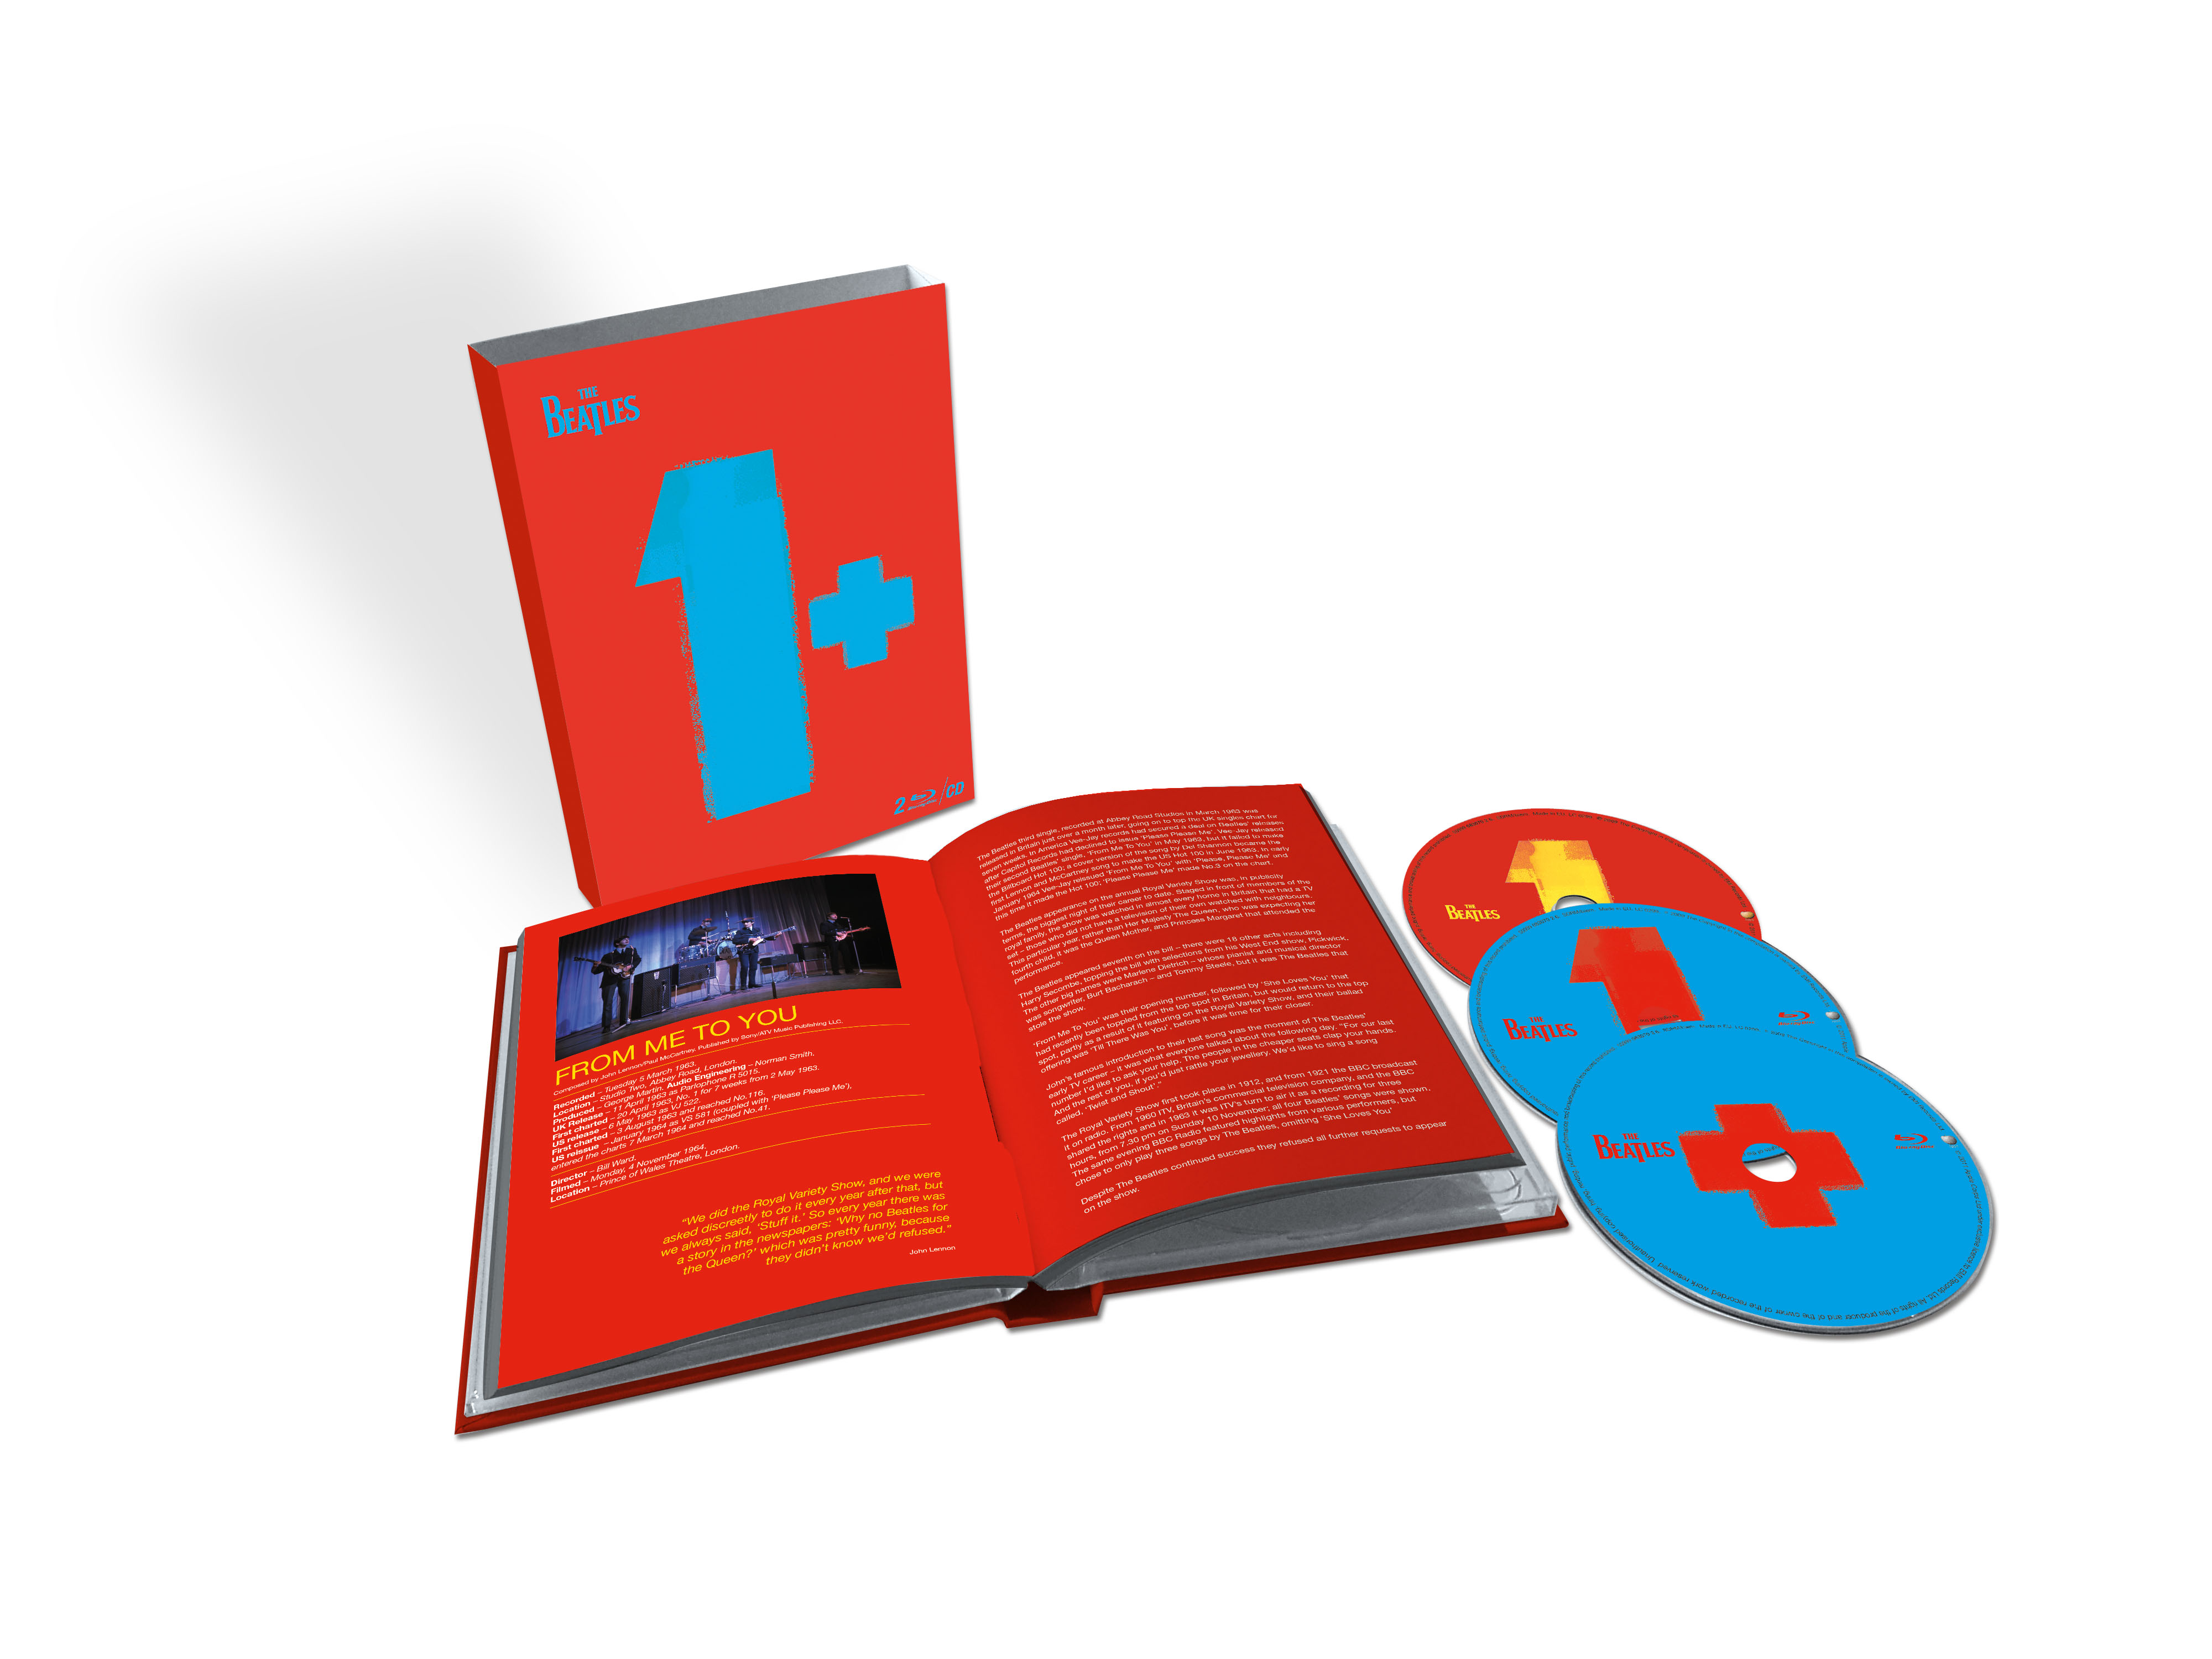 The Beatles - 1 Blu-ray 2 Deluxe Edition Blu-ray) + Disc) + CD - (CD (Ltd